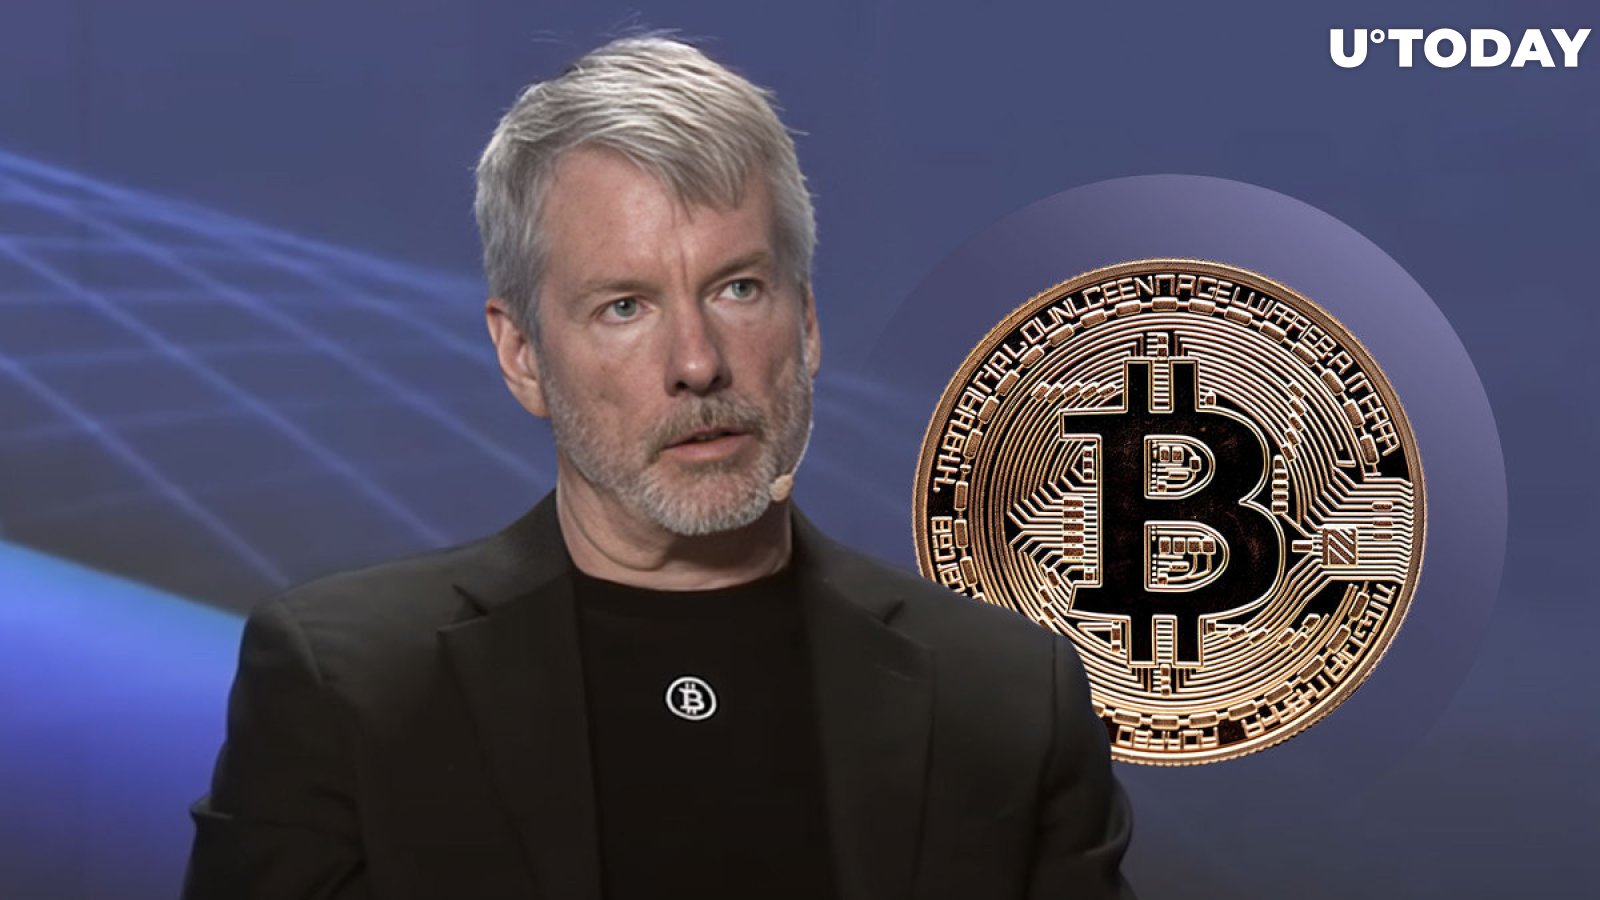 'Satoshi Created a Way,' Michael Saylor Says, Triggering Heated Discussion About Bitcoin Creator